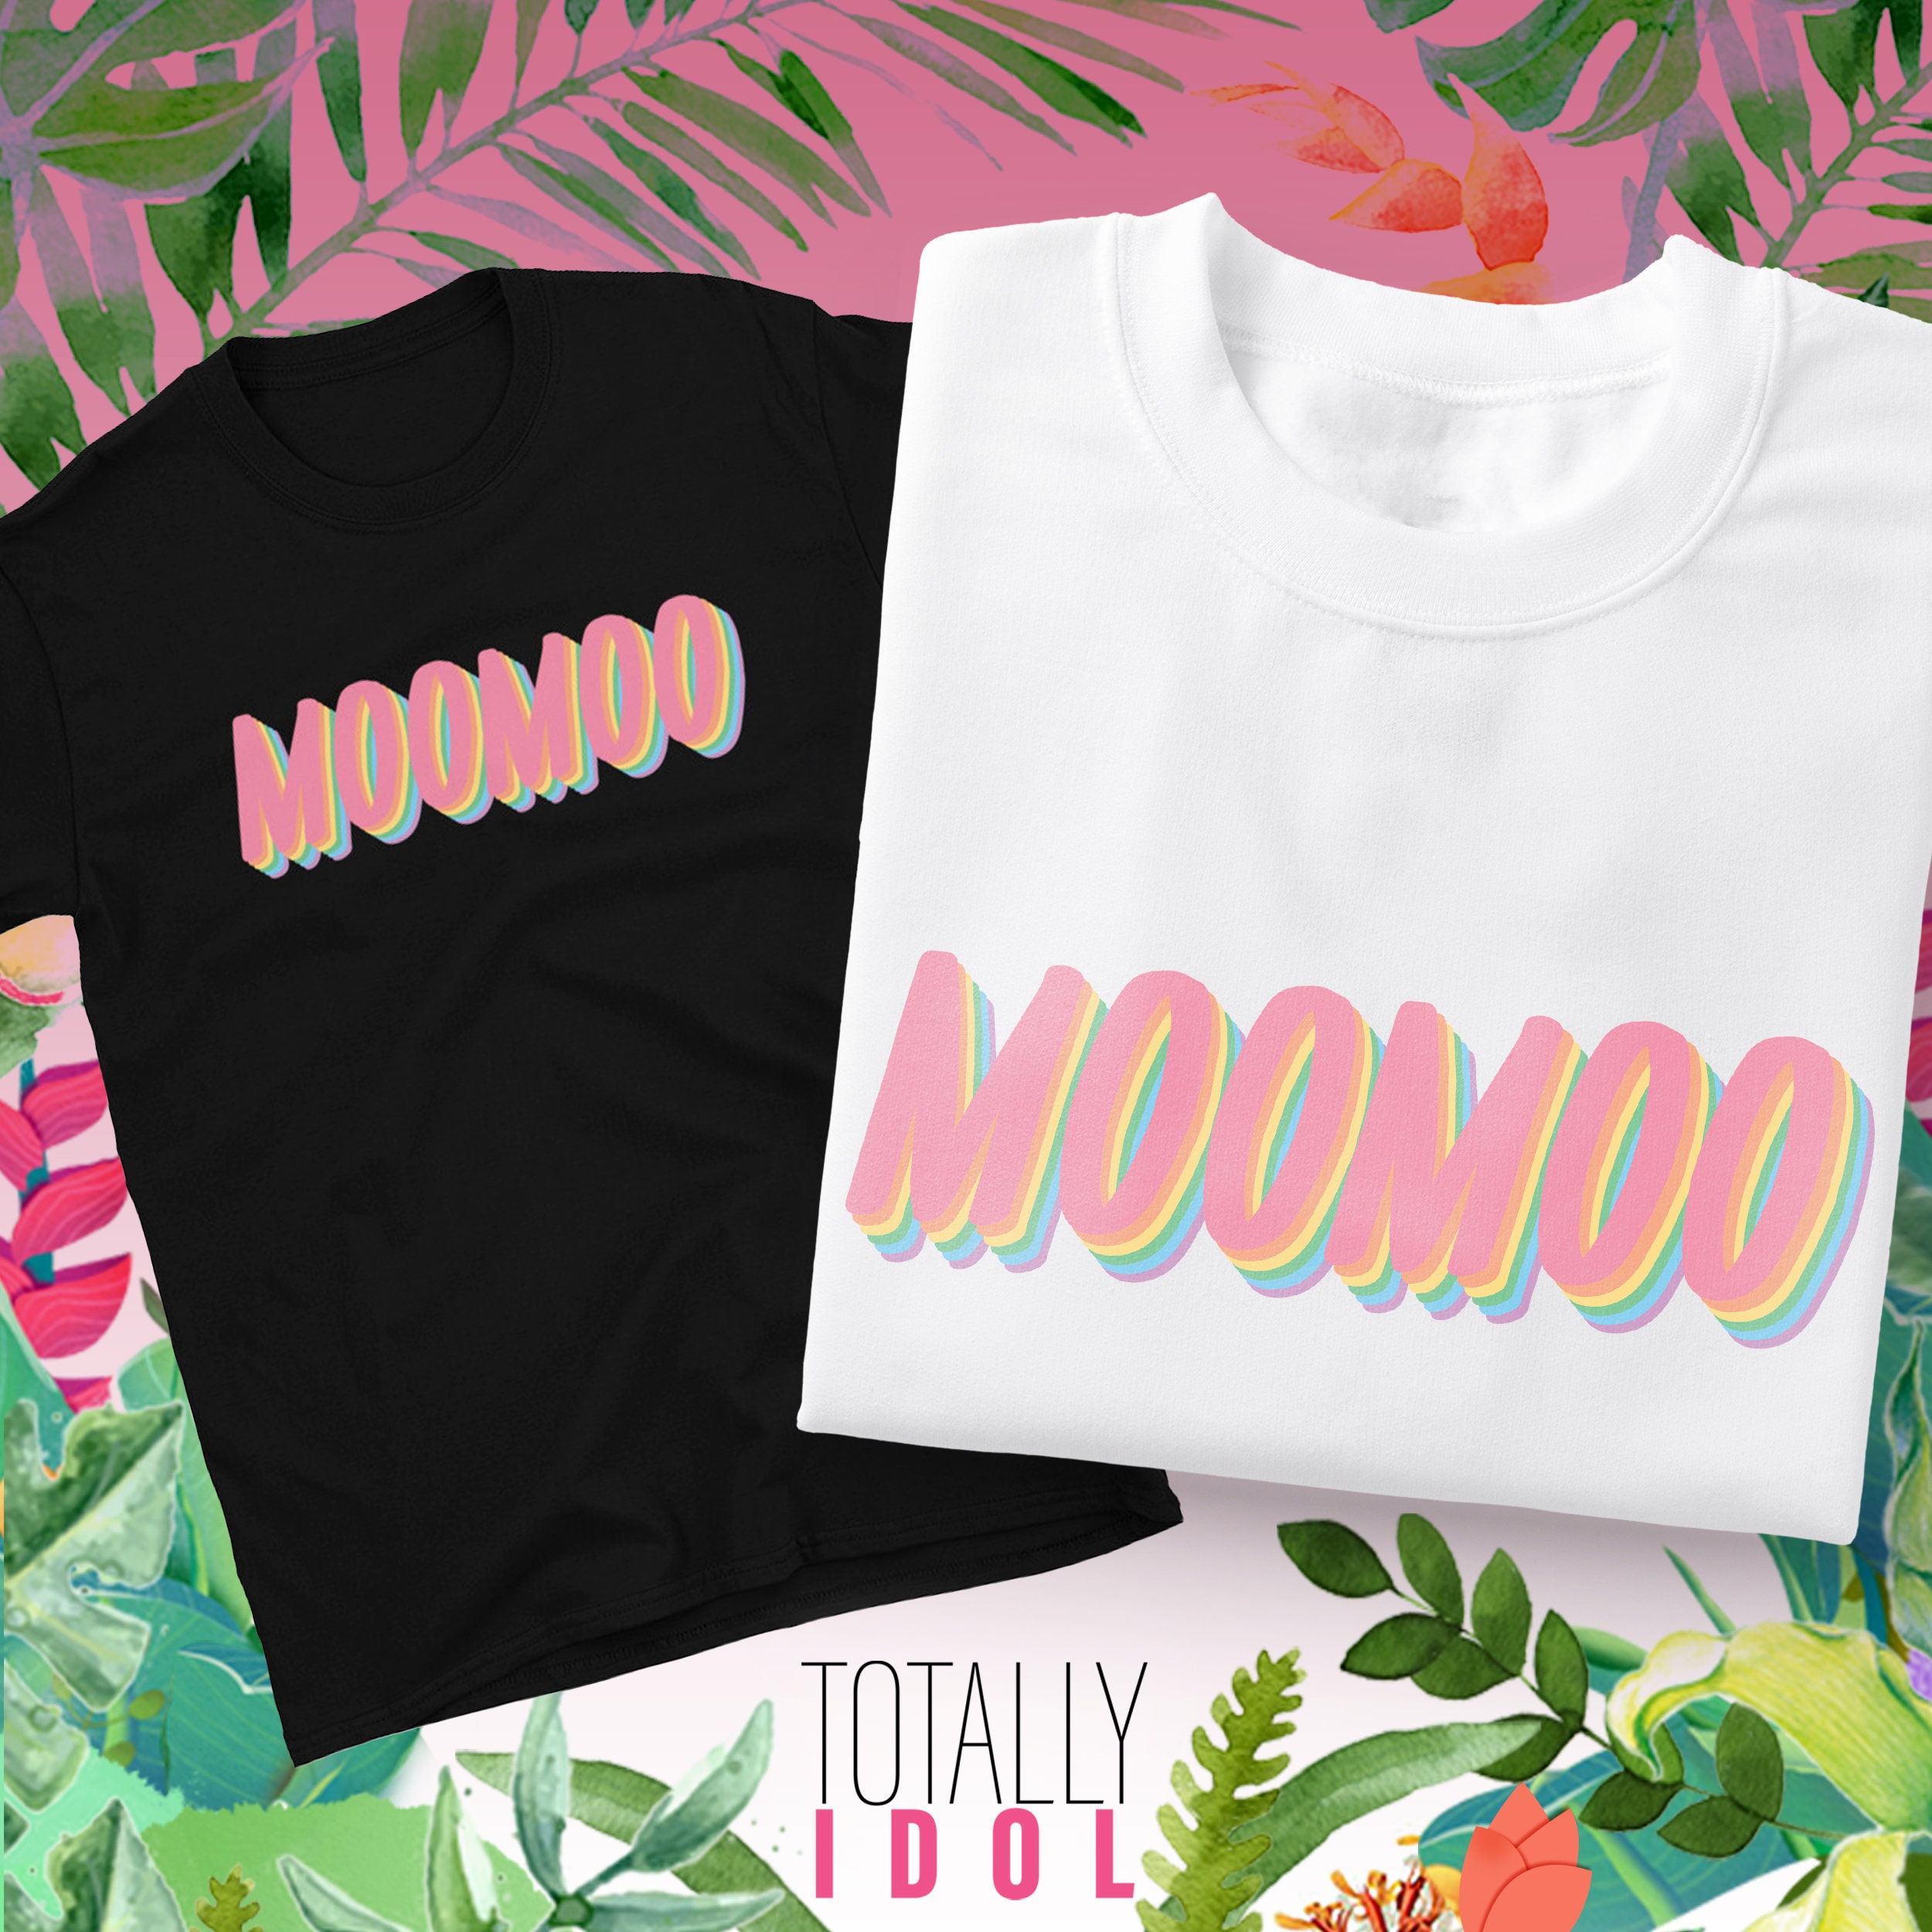 MooMoo - The Best and Most Meaningful KPOP Fandom Name